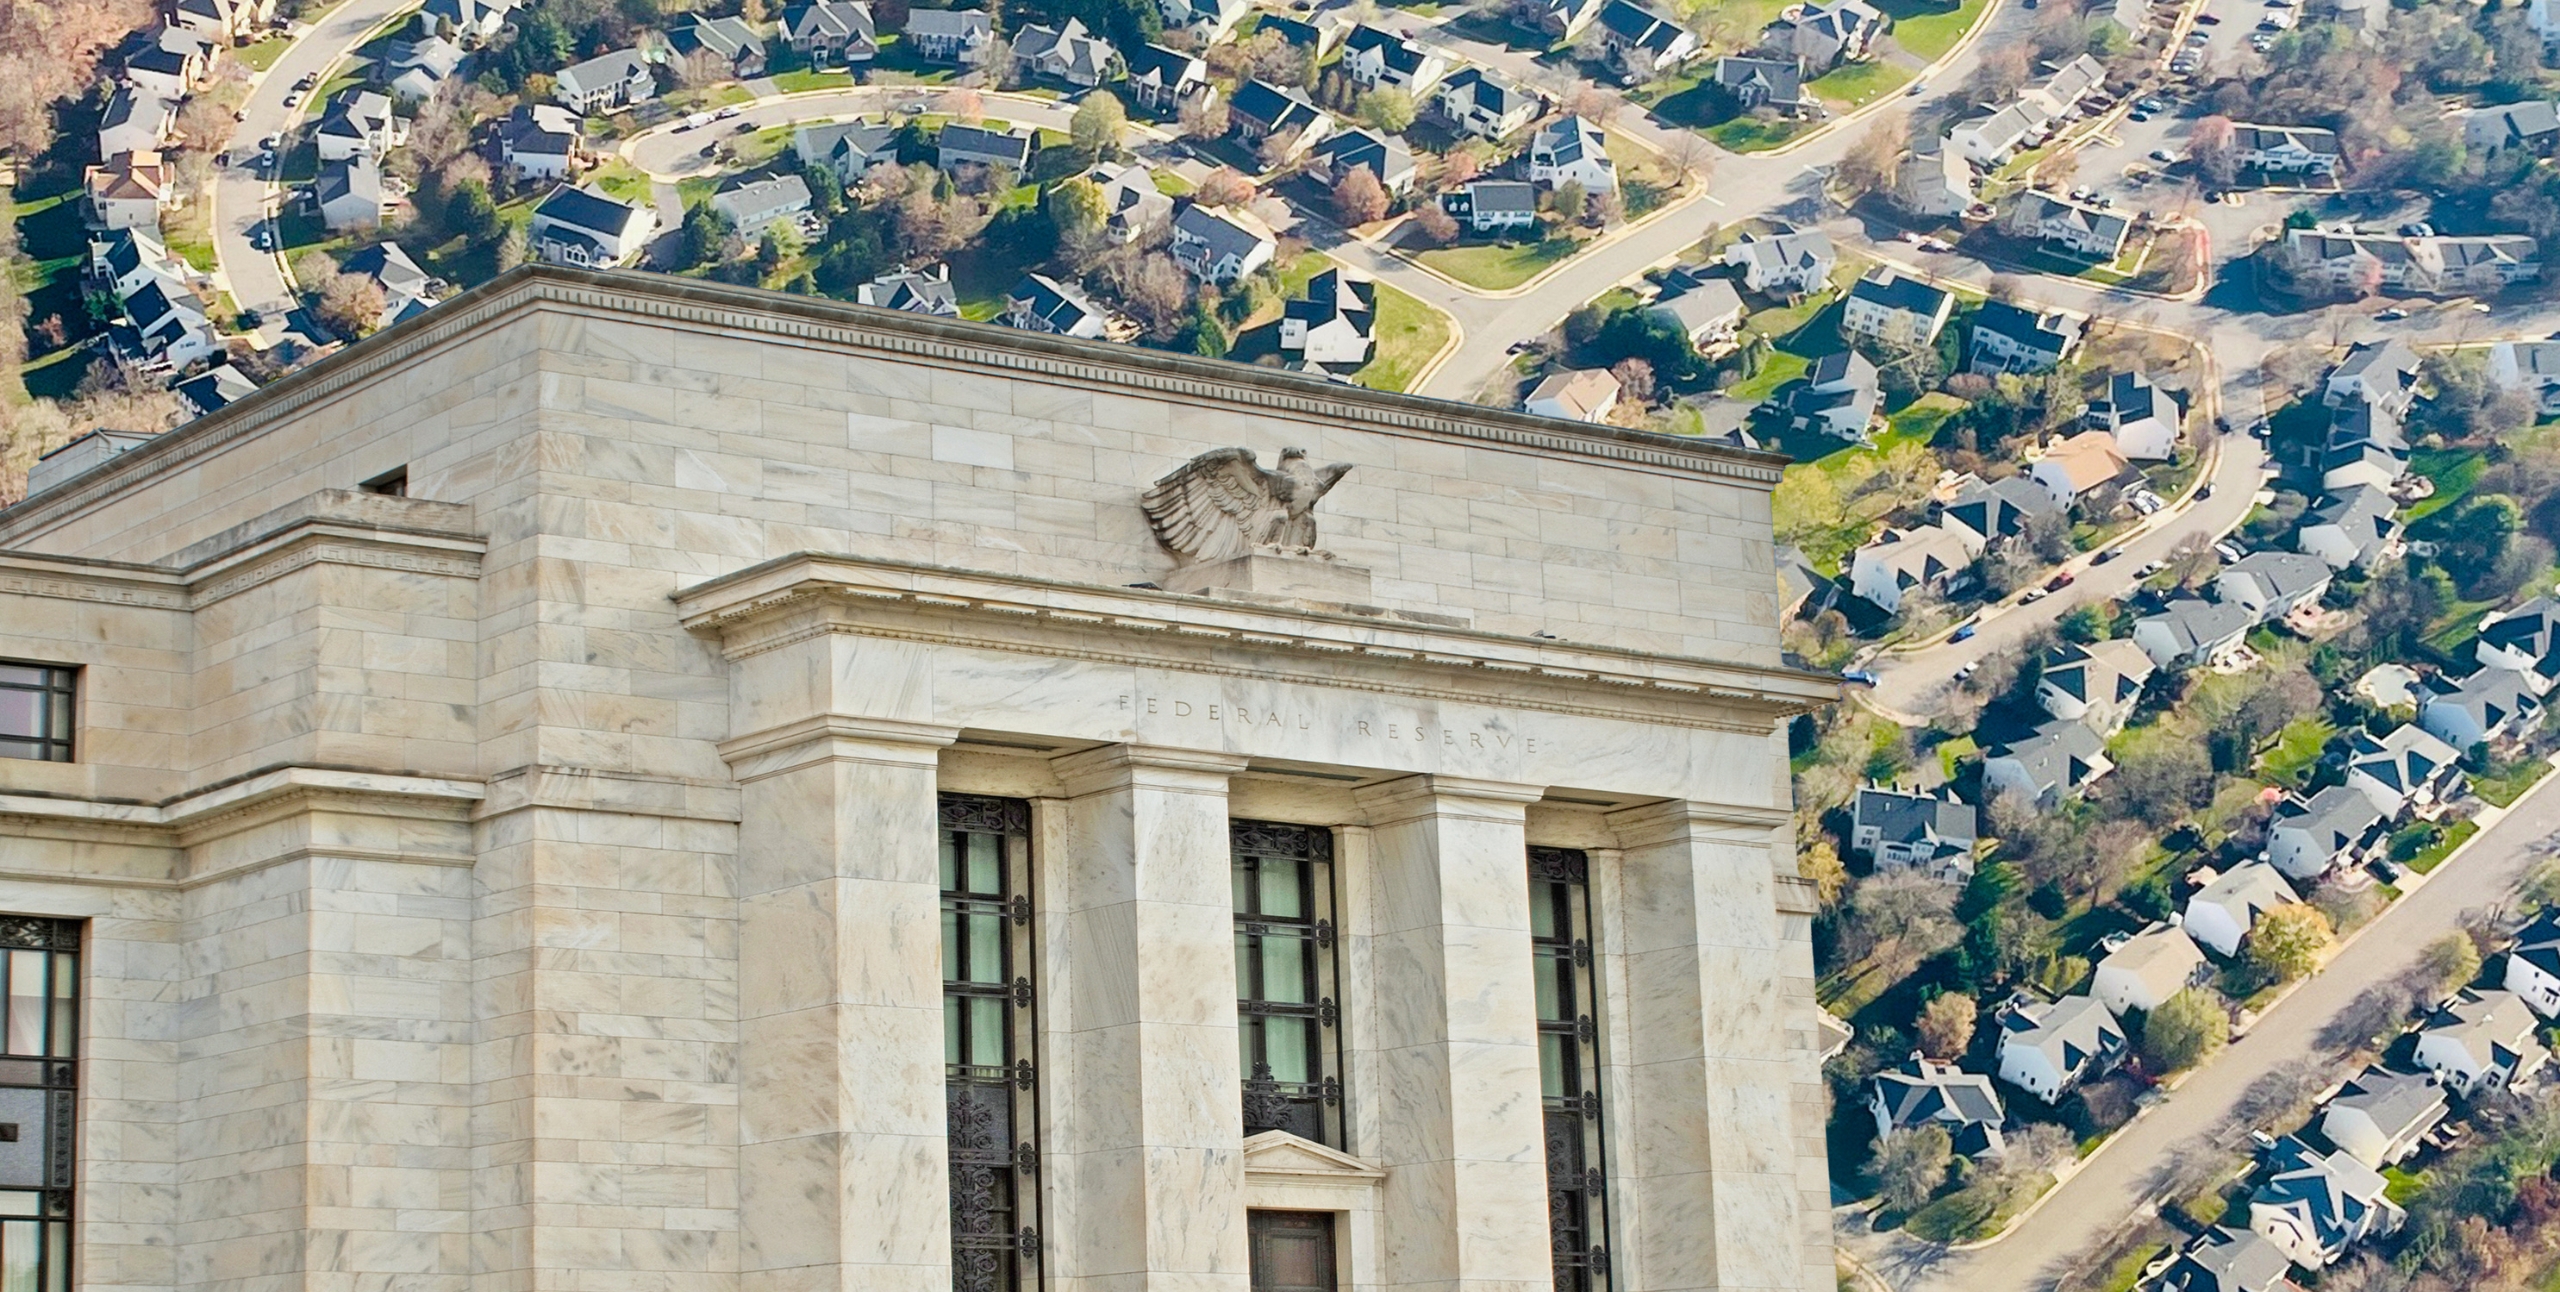 federal reserve cropped over a neighborhood